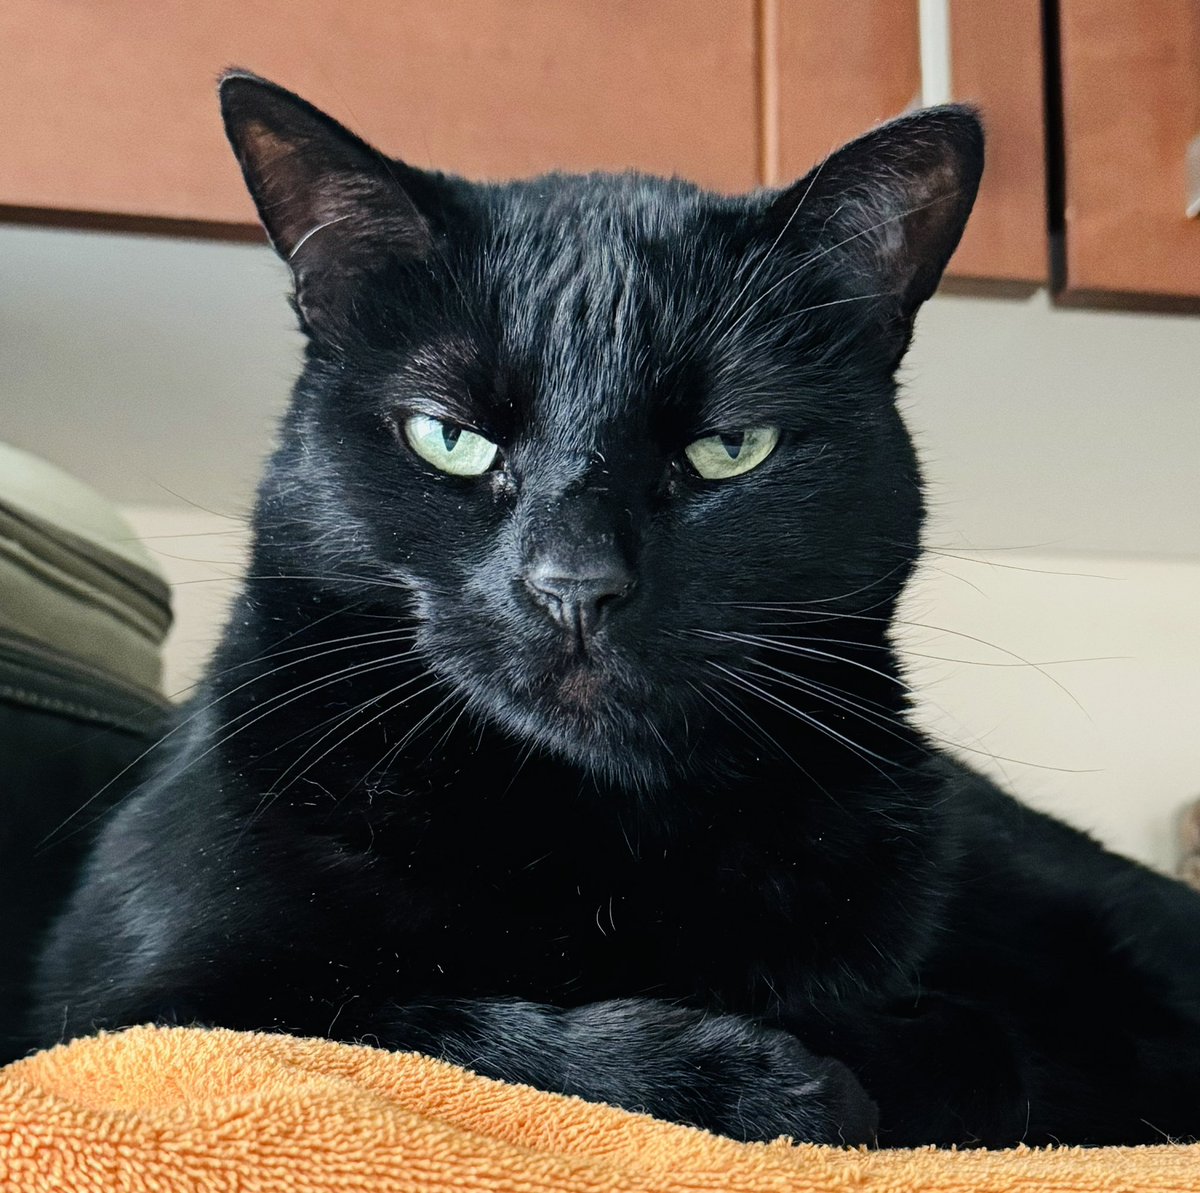 told my cat she has resting bitch face; she was not amused